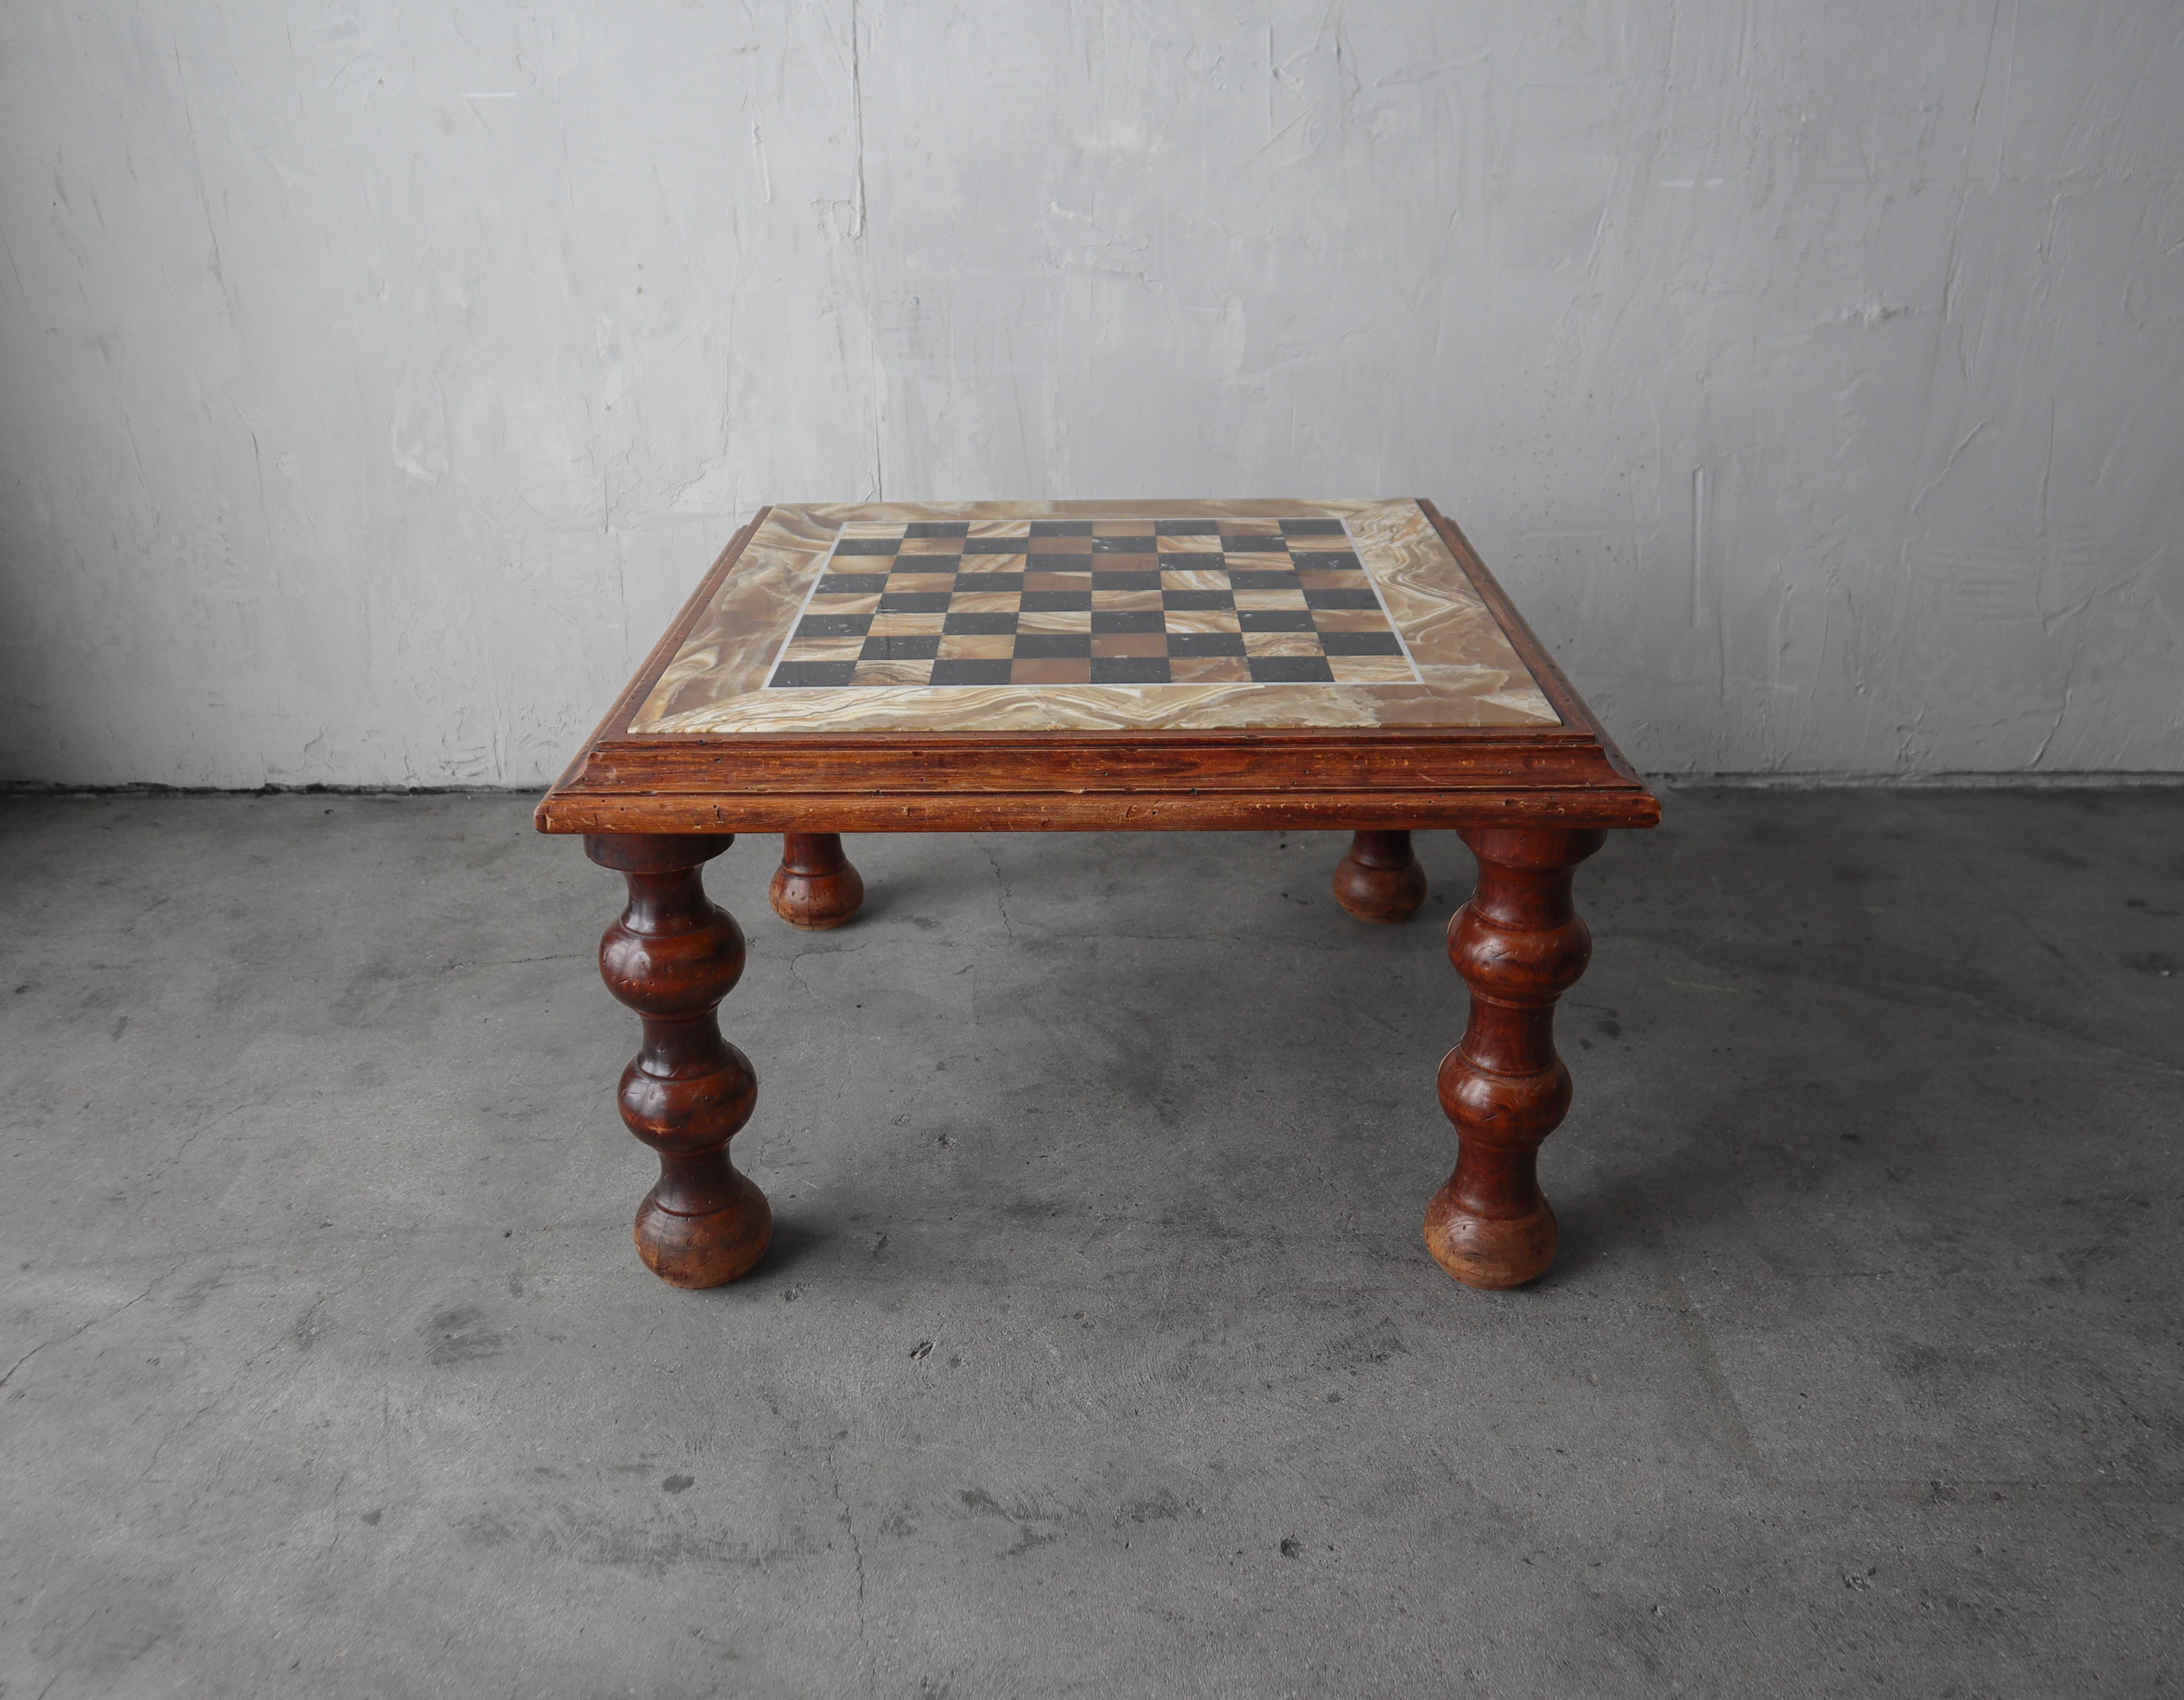 Gorgeous antique checkerboard game table.  Love the hand turned legs and beautiful honey onyx.  A truly unique piece.  Table is coffee table height making it the perfect table between 2 chairs.

The table is in excellent vintage with only minimal